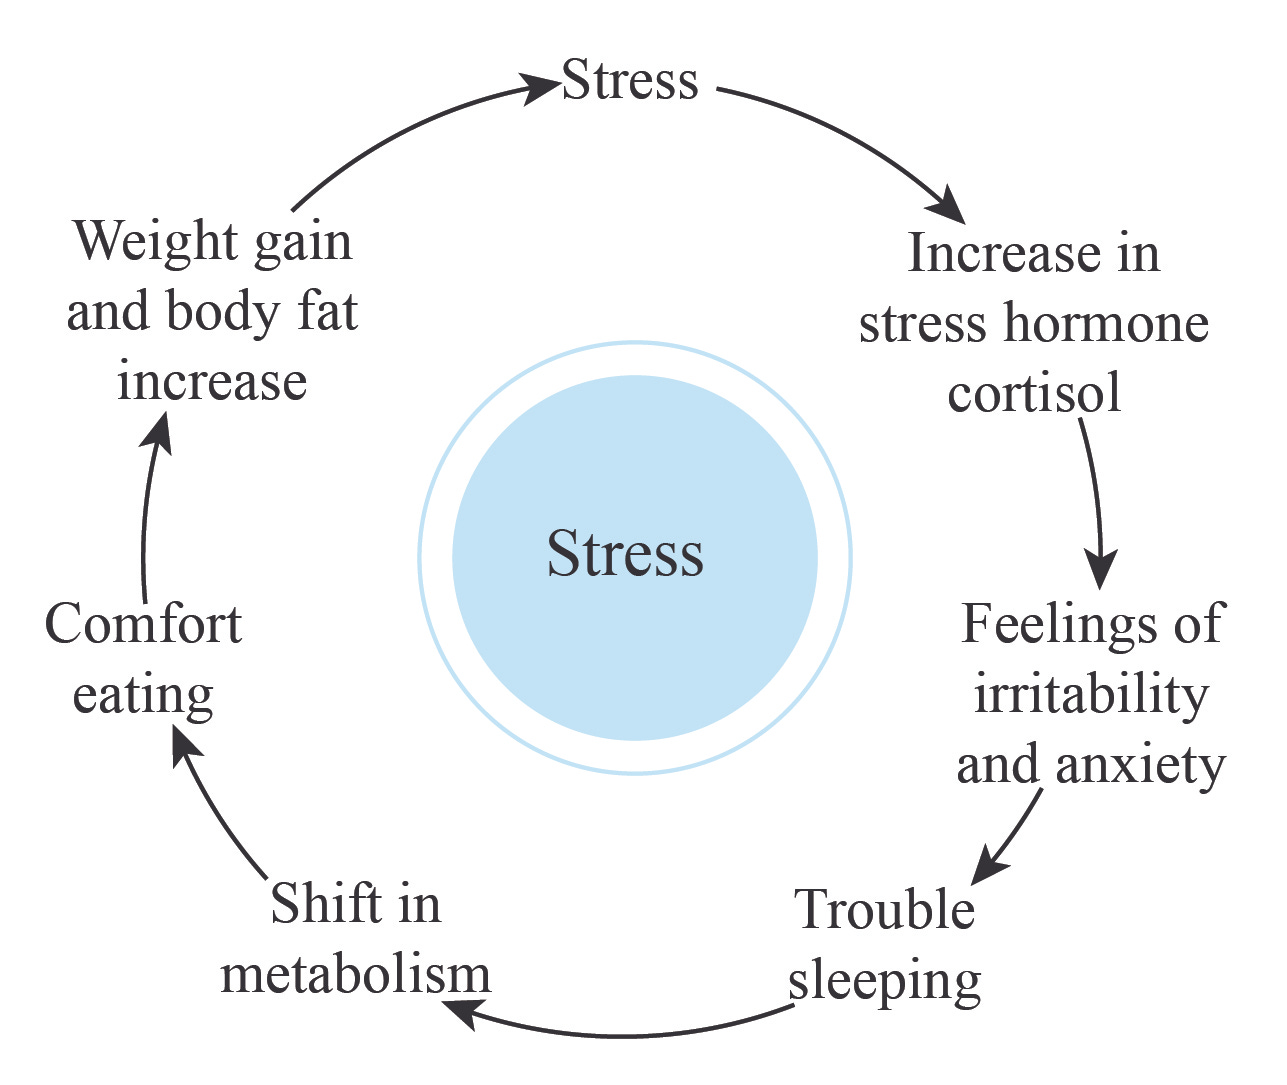 Learn About Basal Metabolic Rate And Stress | Chegg.com